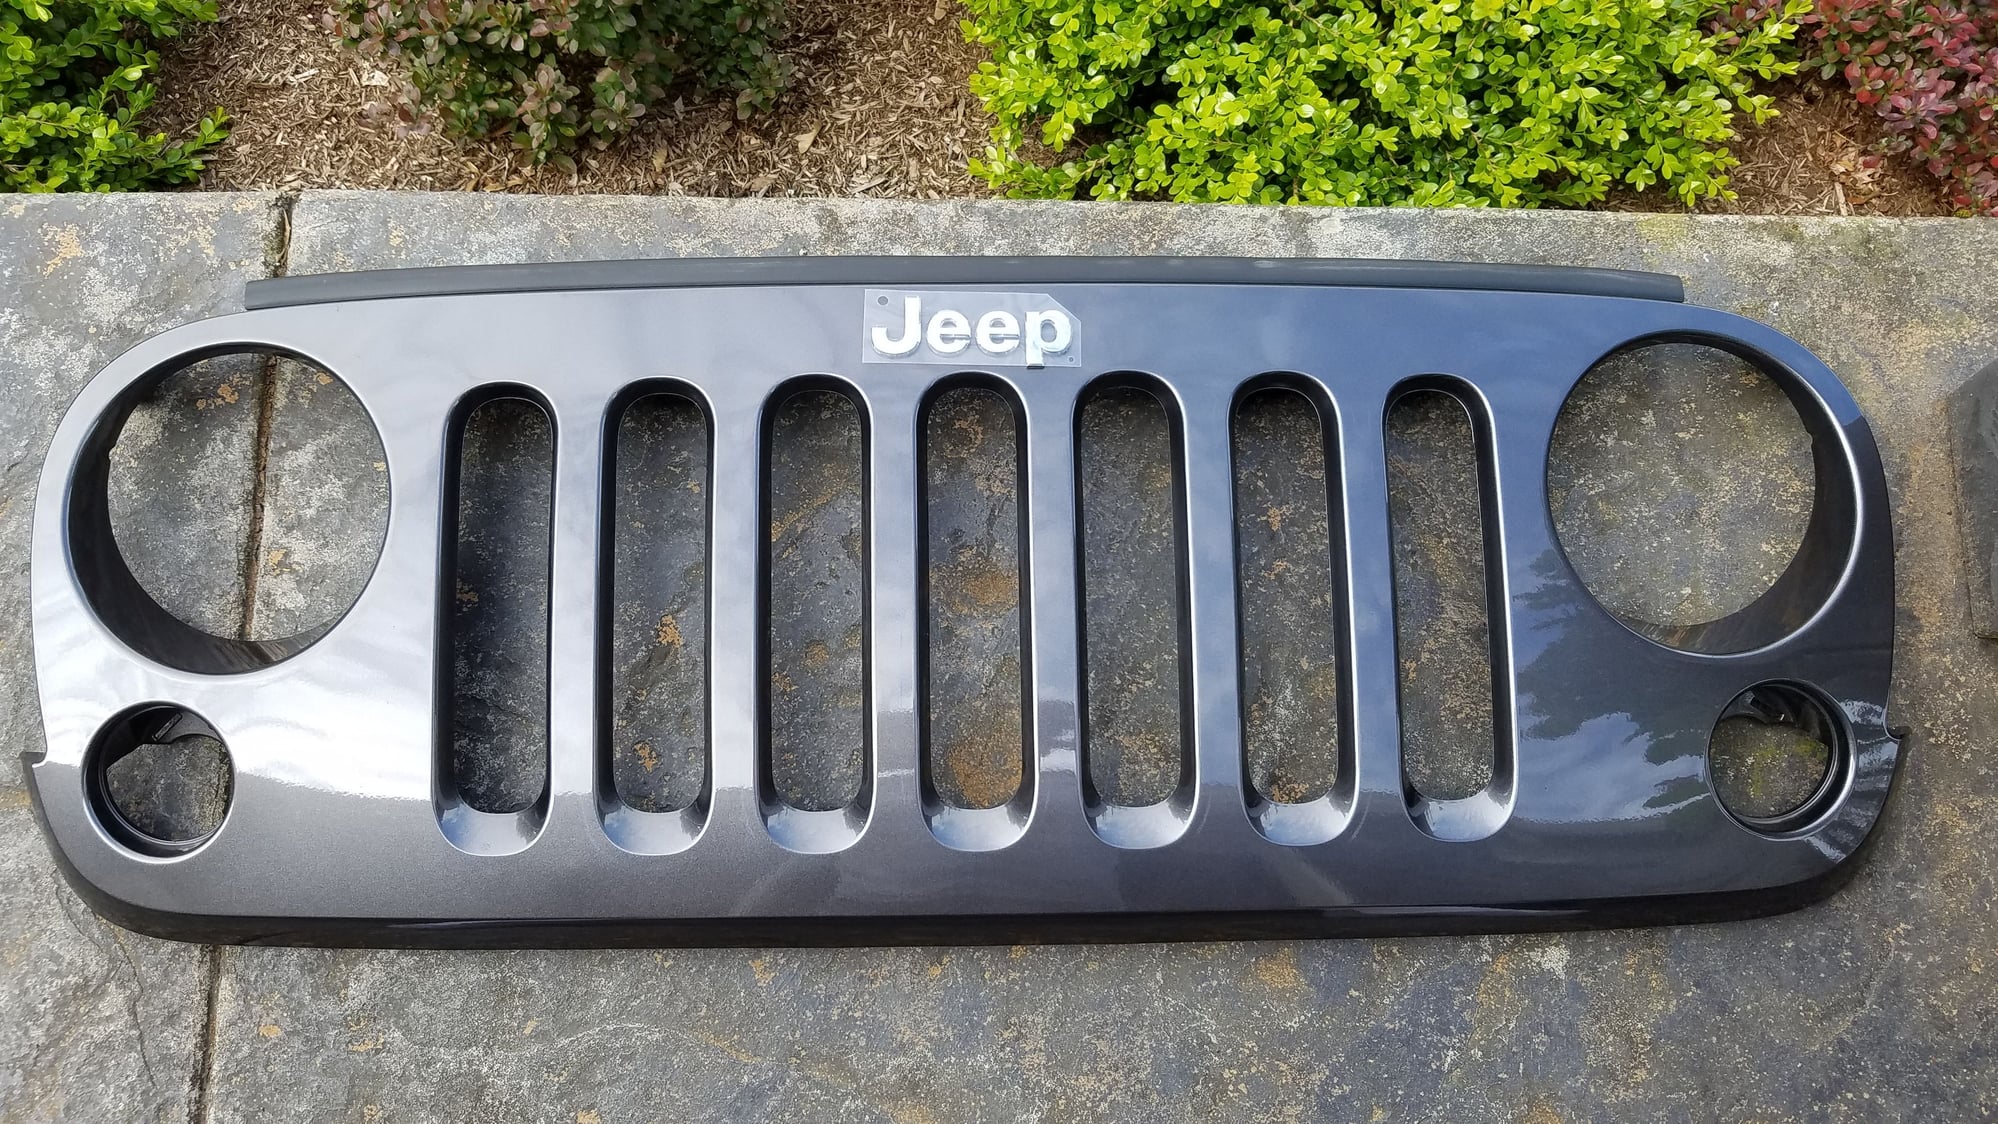 Miscellaneous - FS: 2016 Front Grill - Used - 2016 Jeep Wrangler - Portland, OR 97007, United States